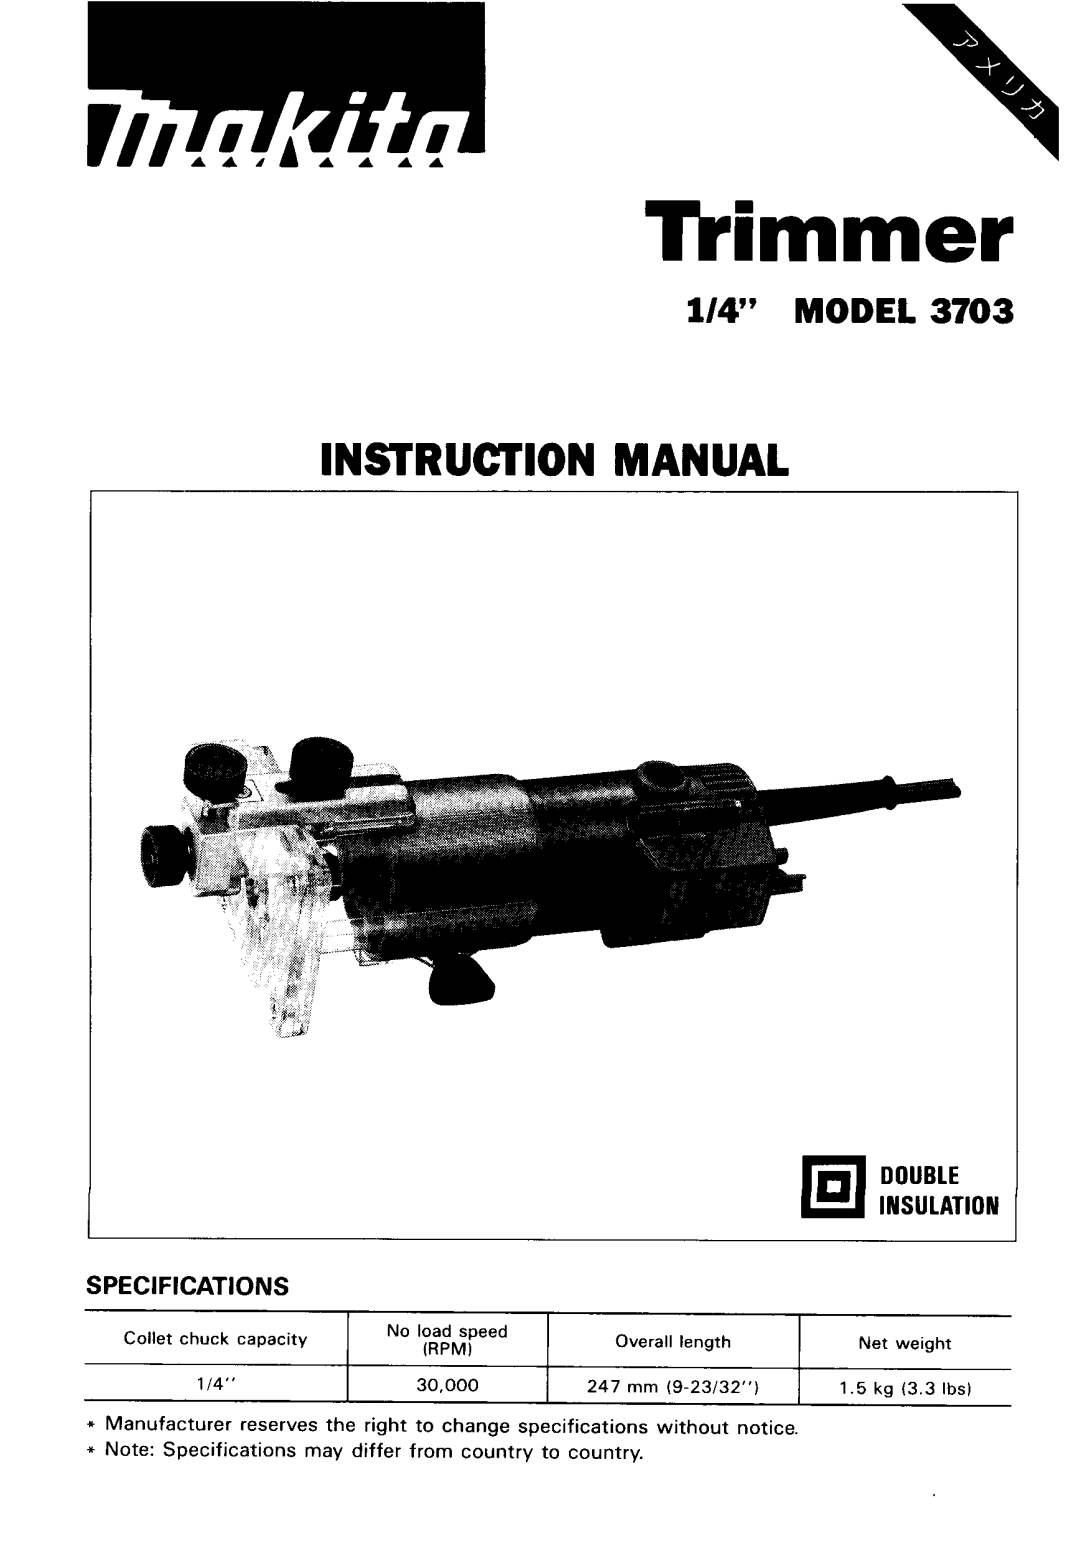 Makita 3703 instruction manual 1/4” MODEL, Double Insulation, TLimmer, Rpmi, 114”, 30,000, 247 mm 9-23132”, k g 3.3 lbsl 